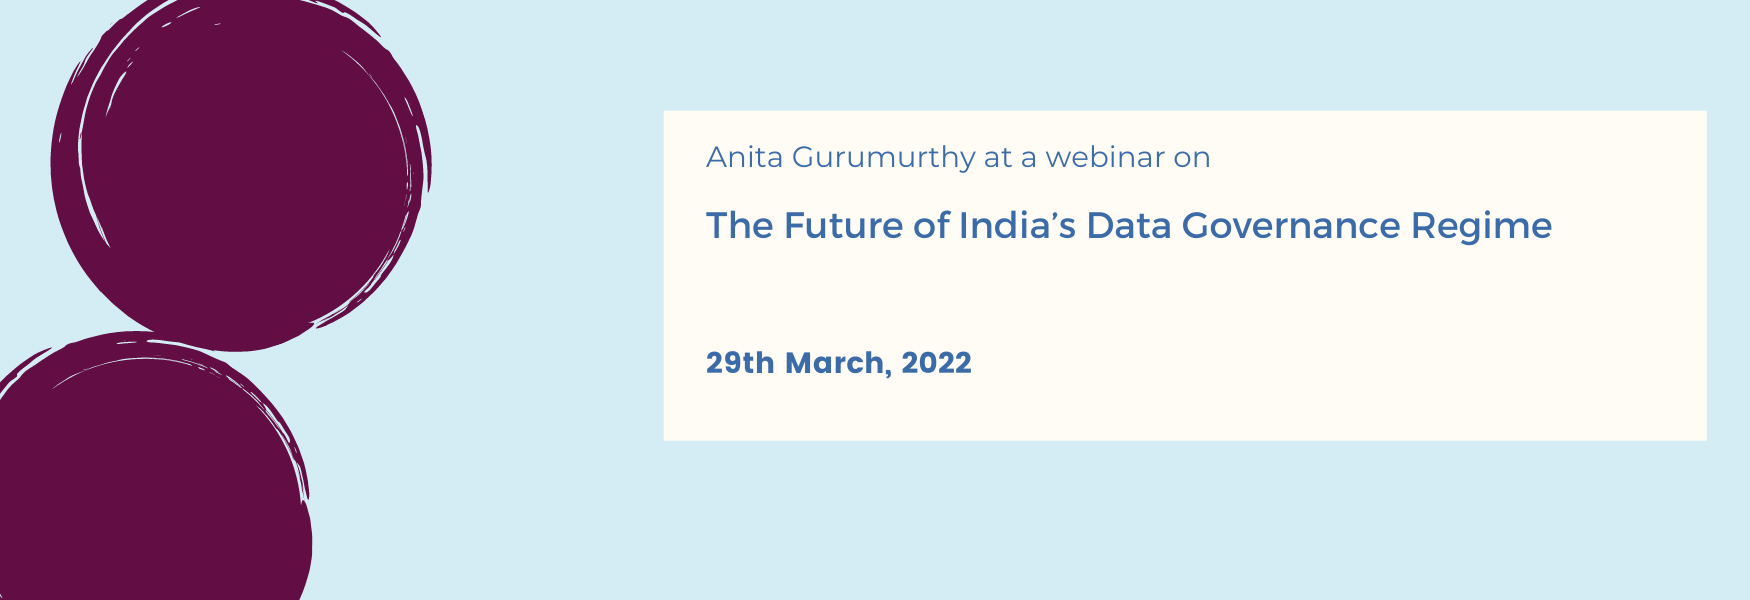 The Future of India’s Data Governance Regime